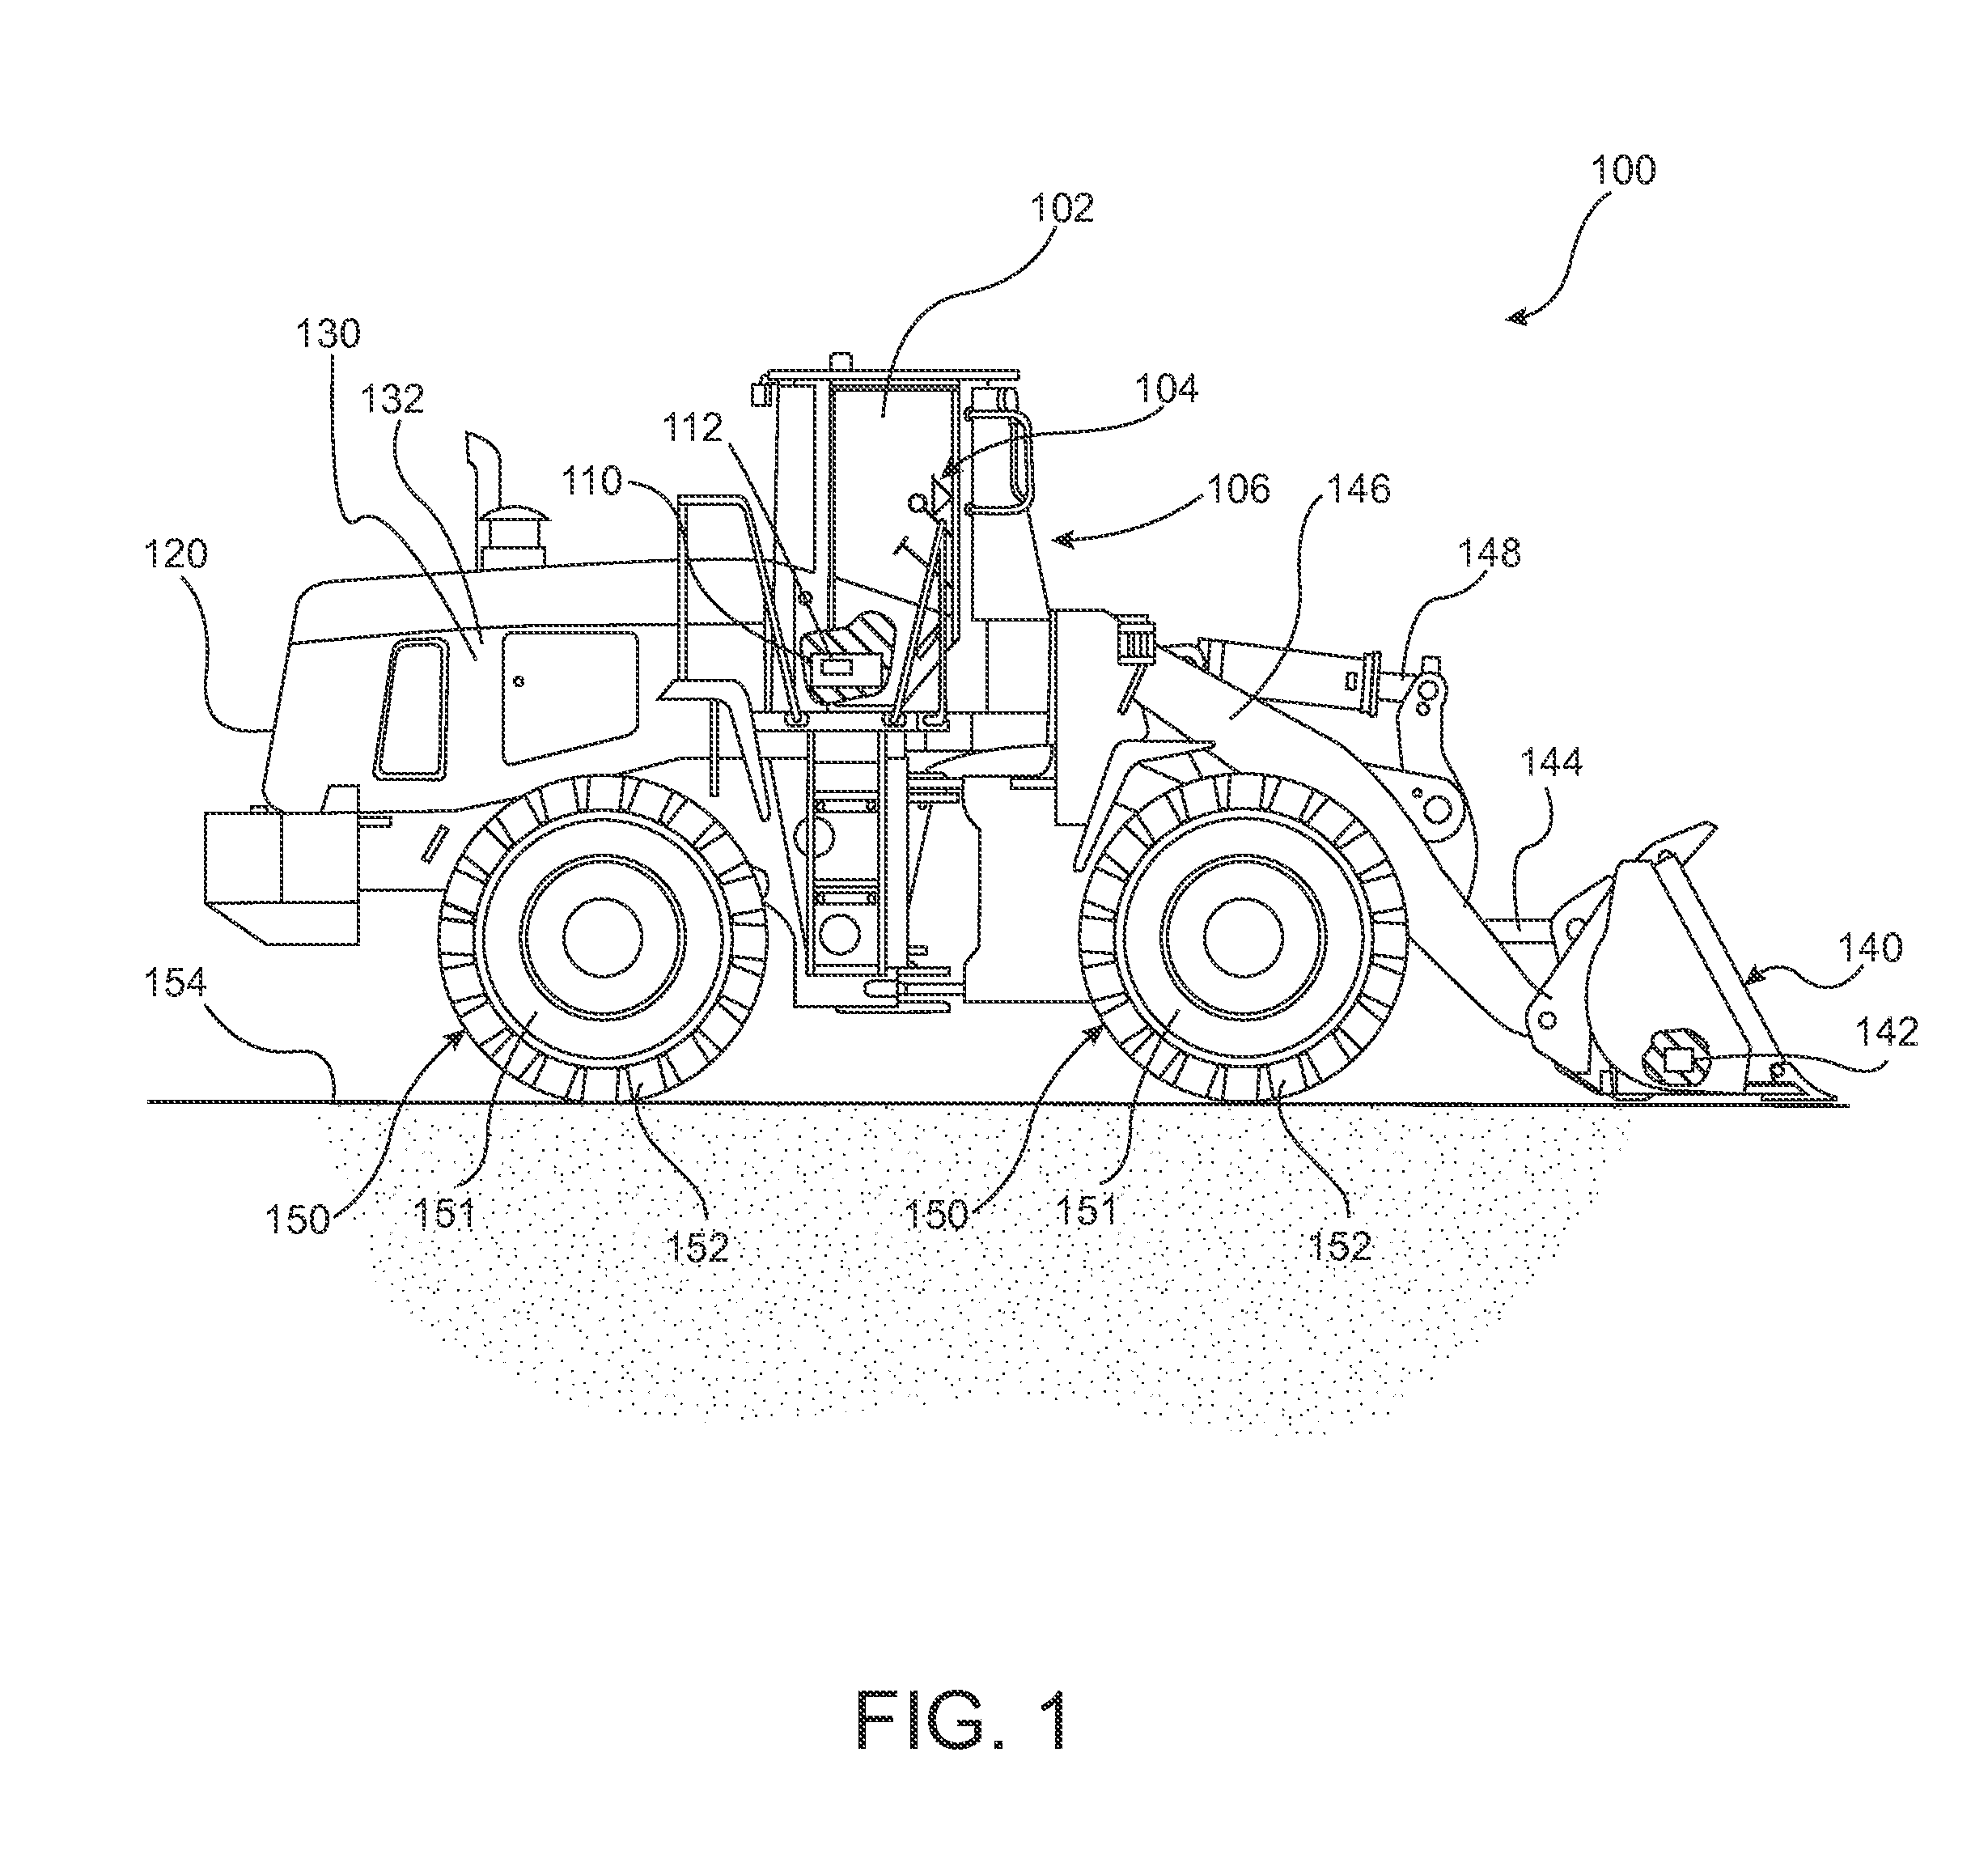 Traction control system and process for a machine having a work implement